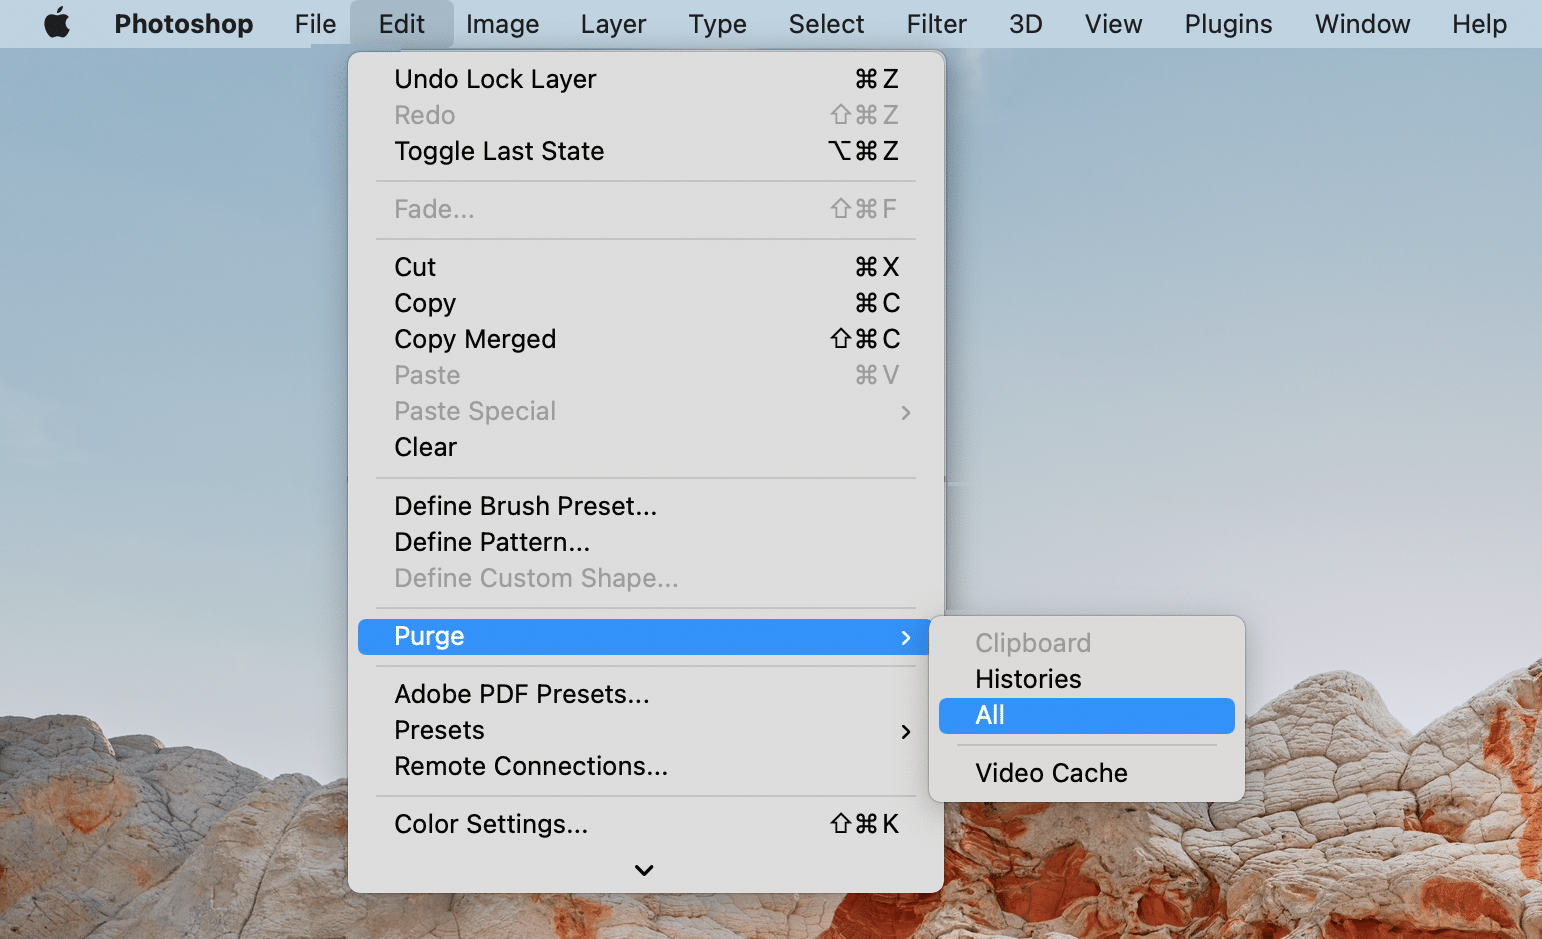 Photoshop menu showing how to clear scratch disk